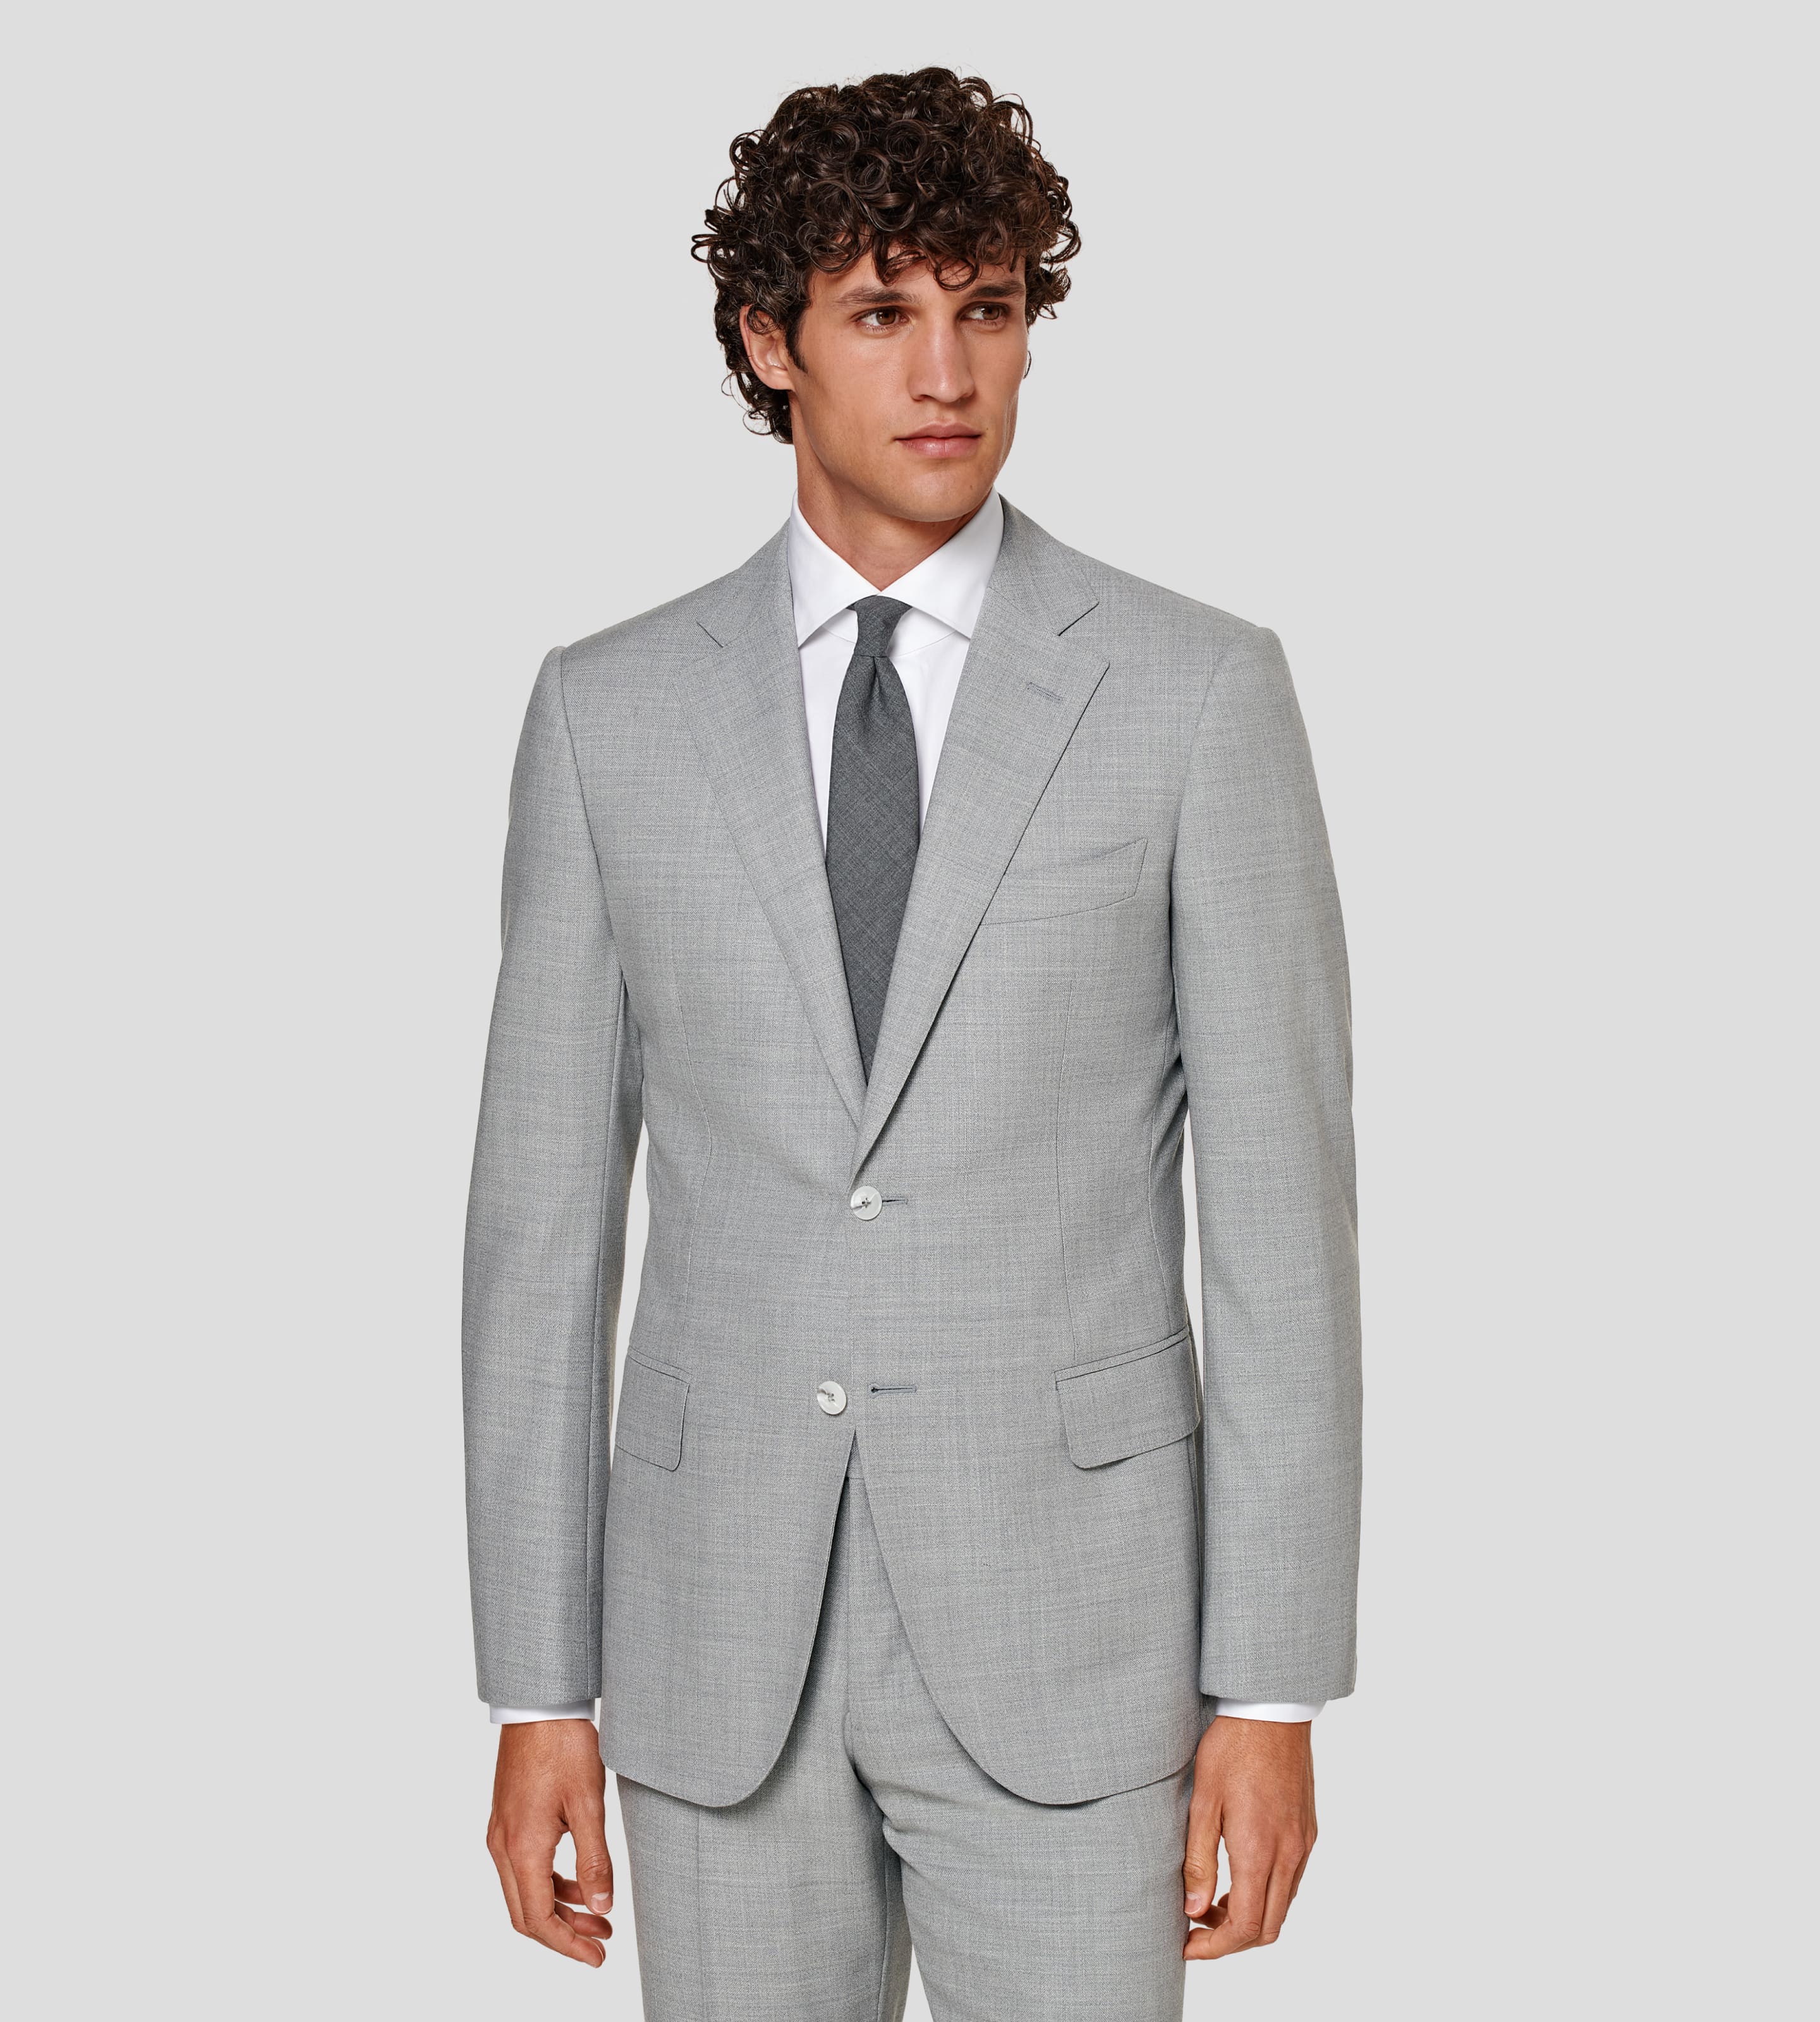 Grey suit with flap pockets and notch lapel, worn with white shirt and grey tie